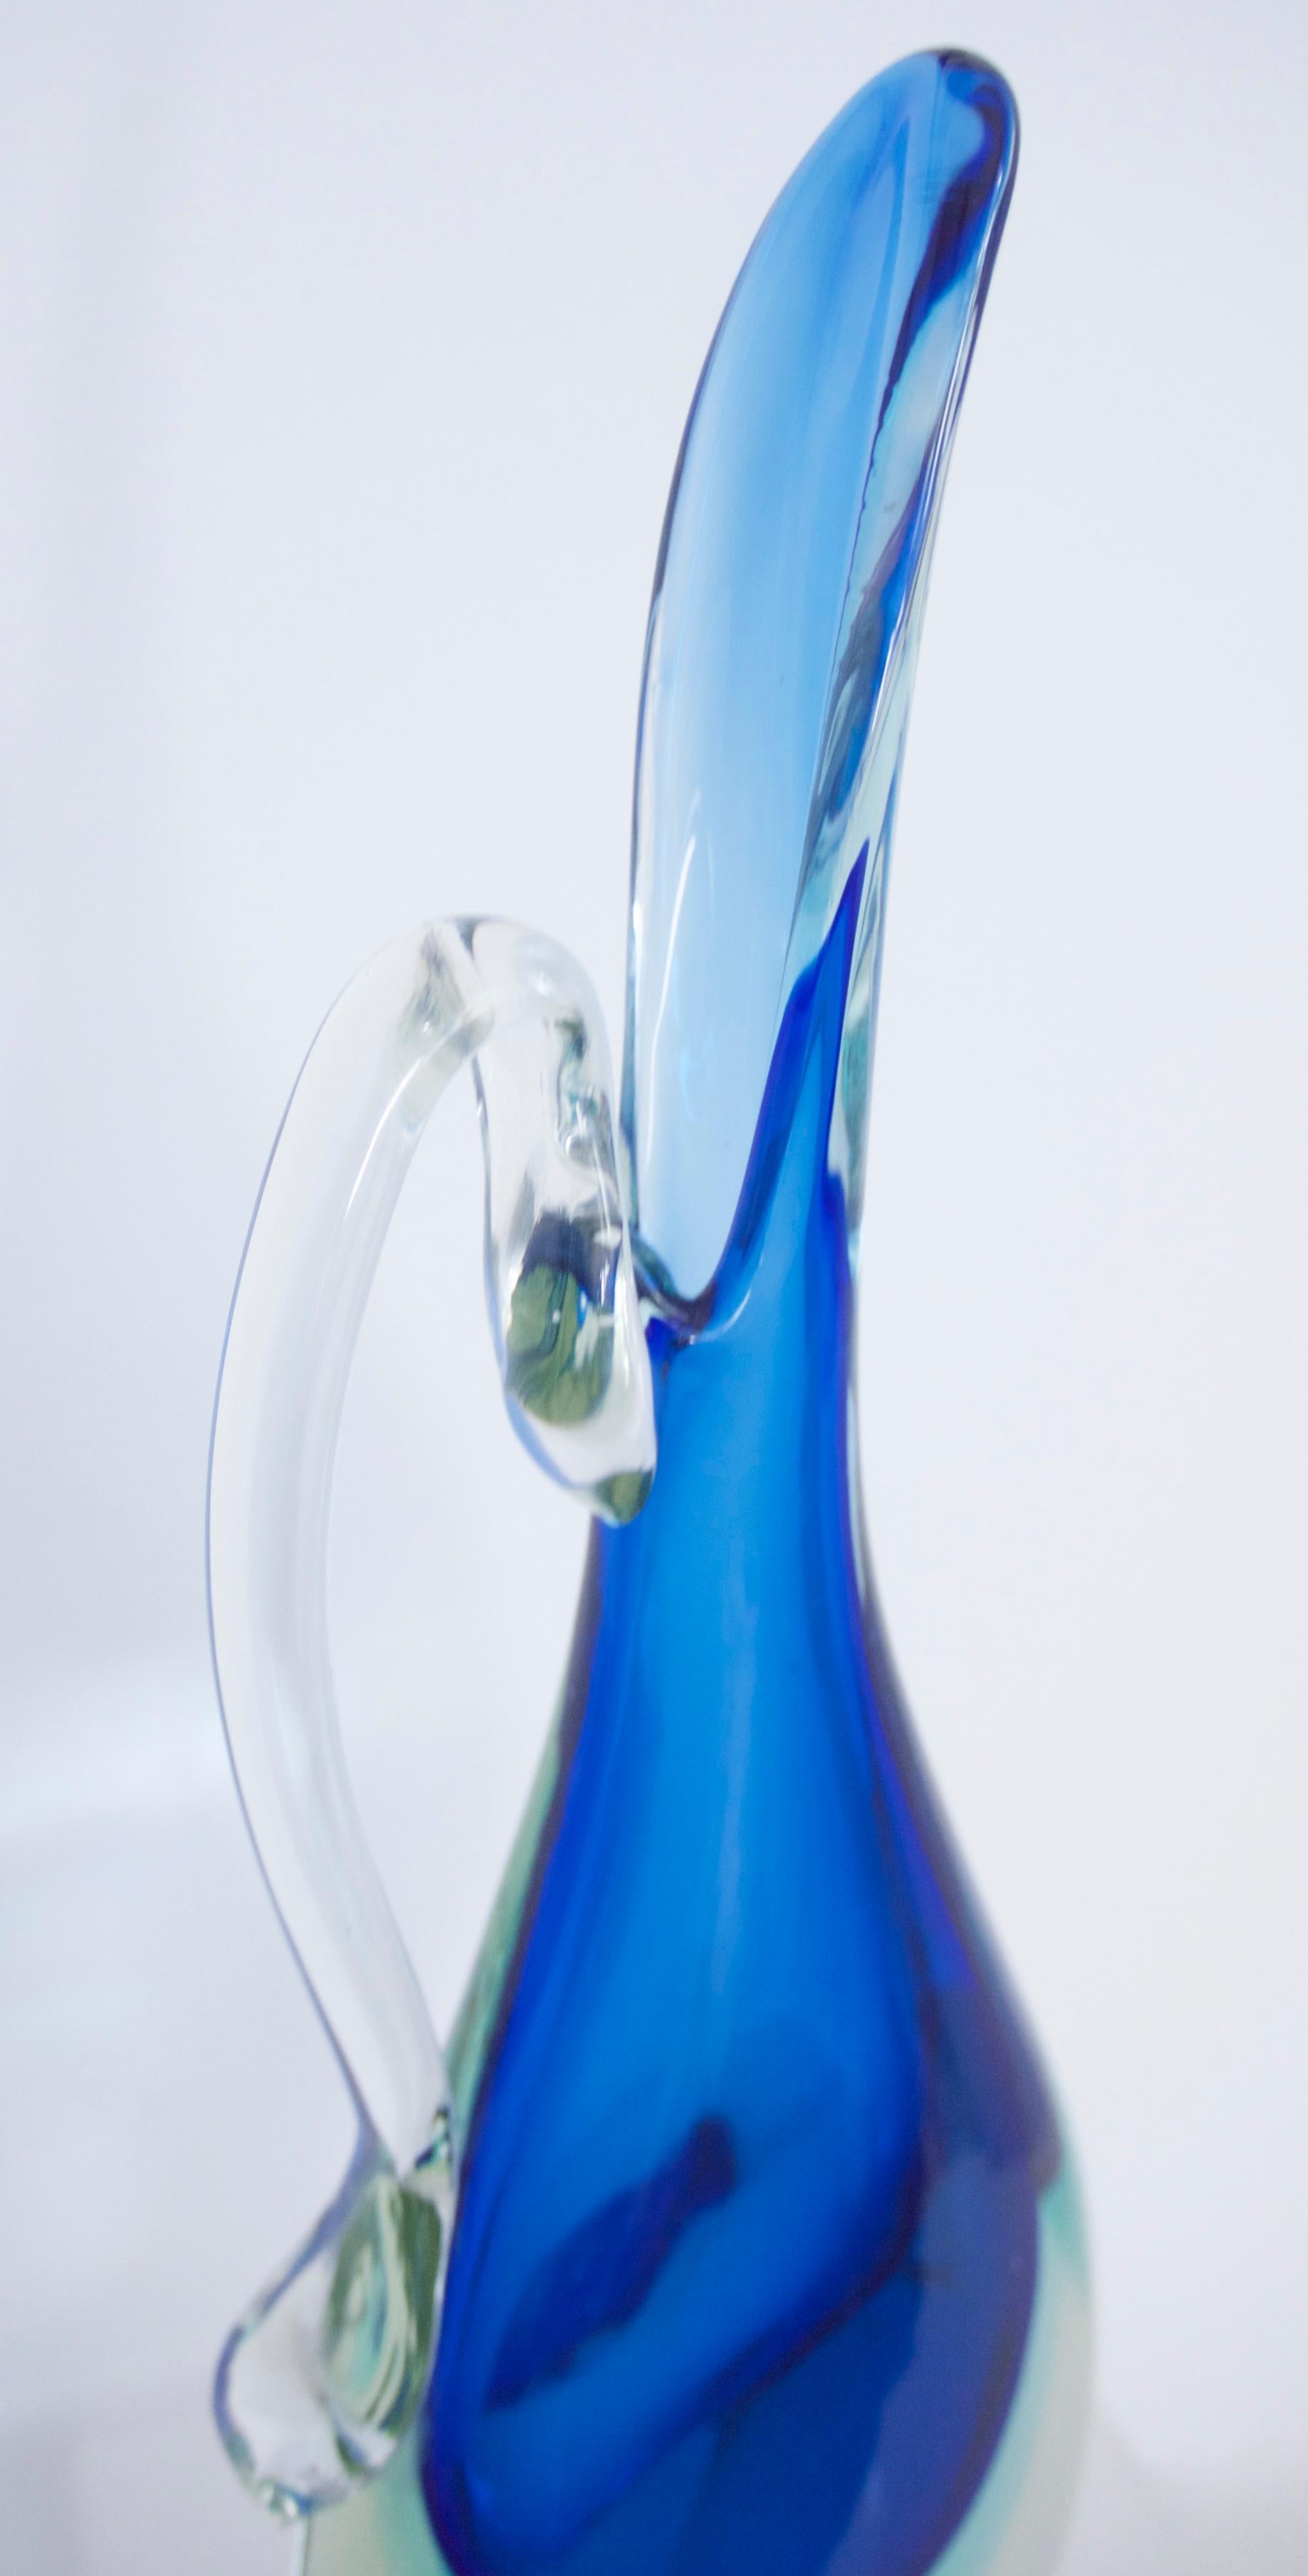 Pair of Murano Sommerso Glass Vases/Pitchers in Layered Shades of Blue, 1980s In Good Condition For Sale In Halstead, GB